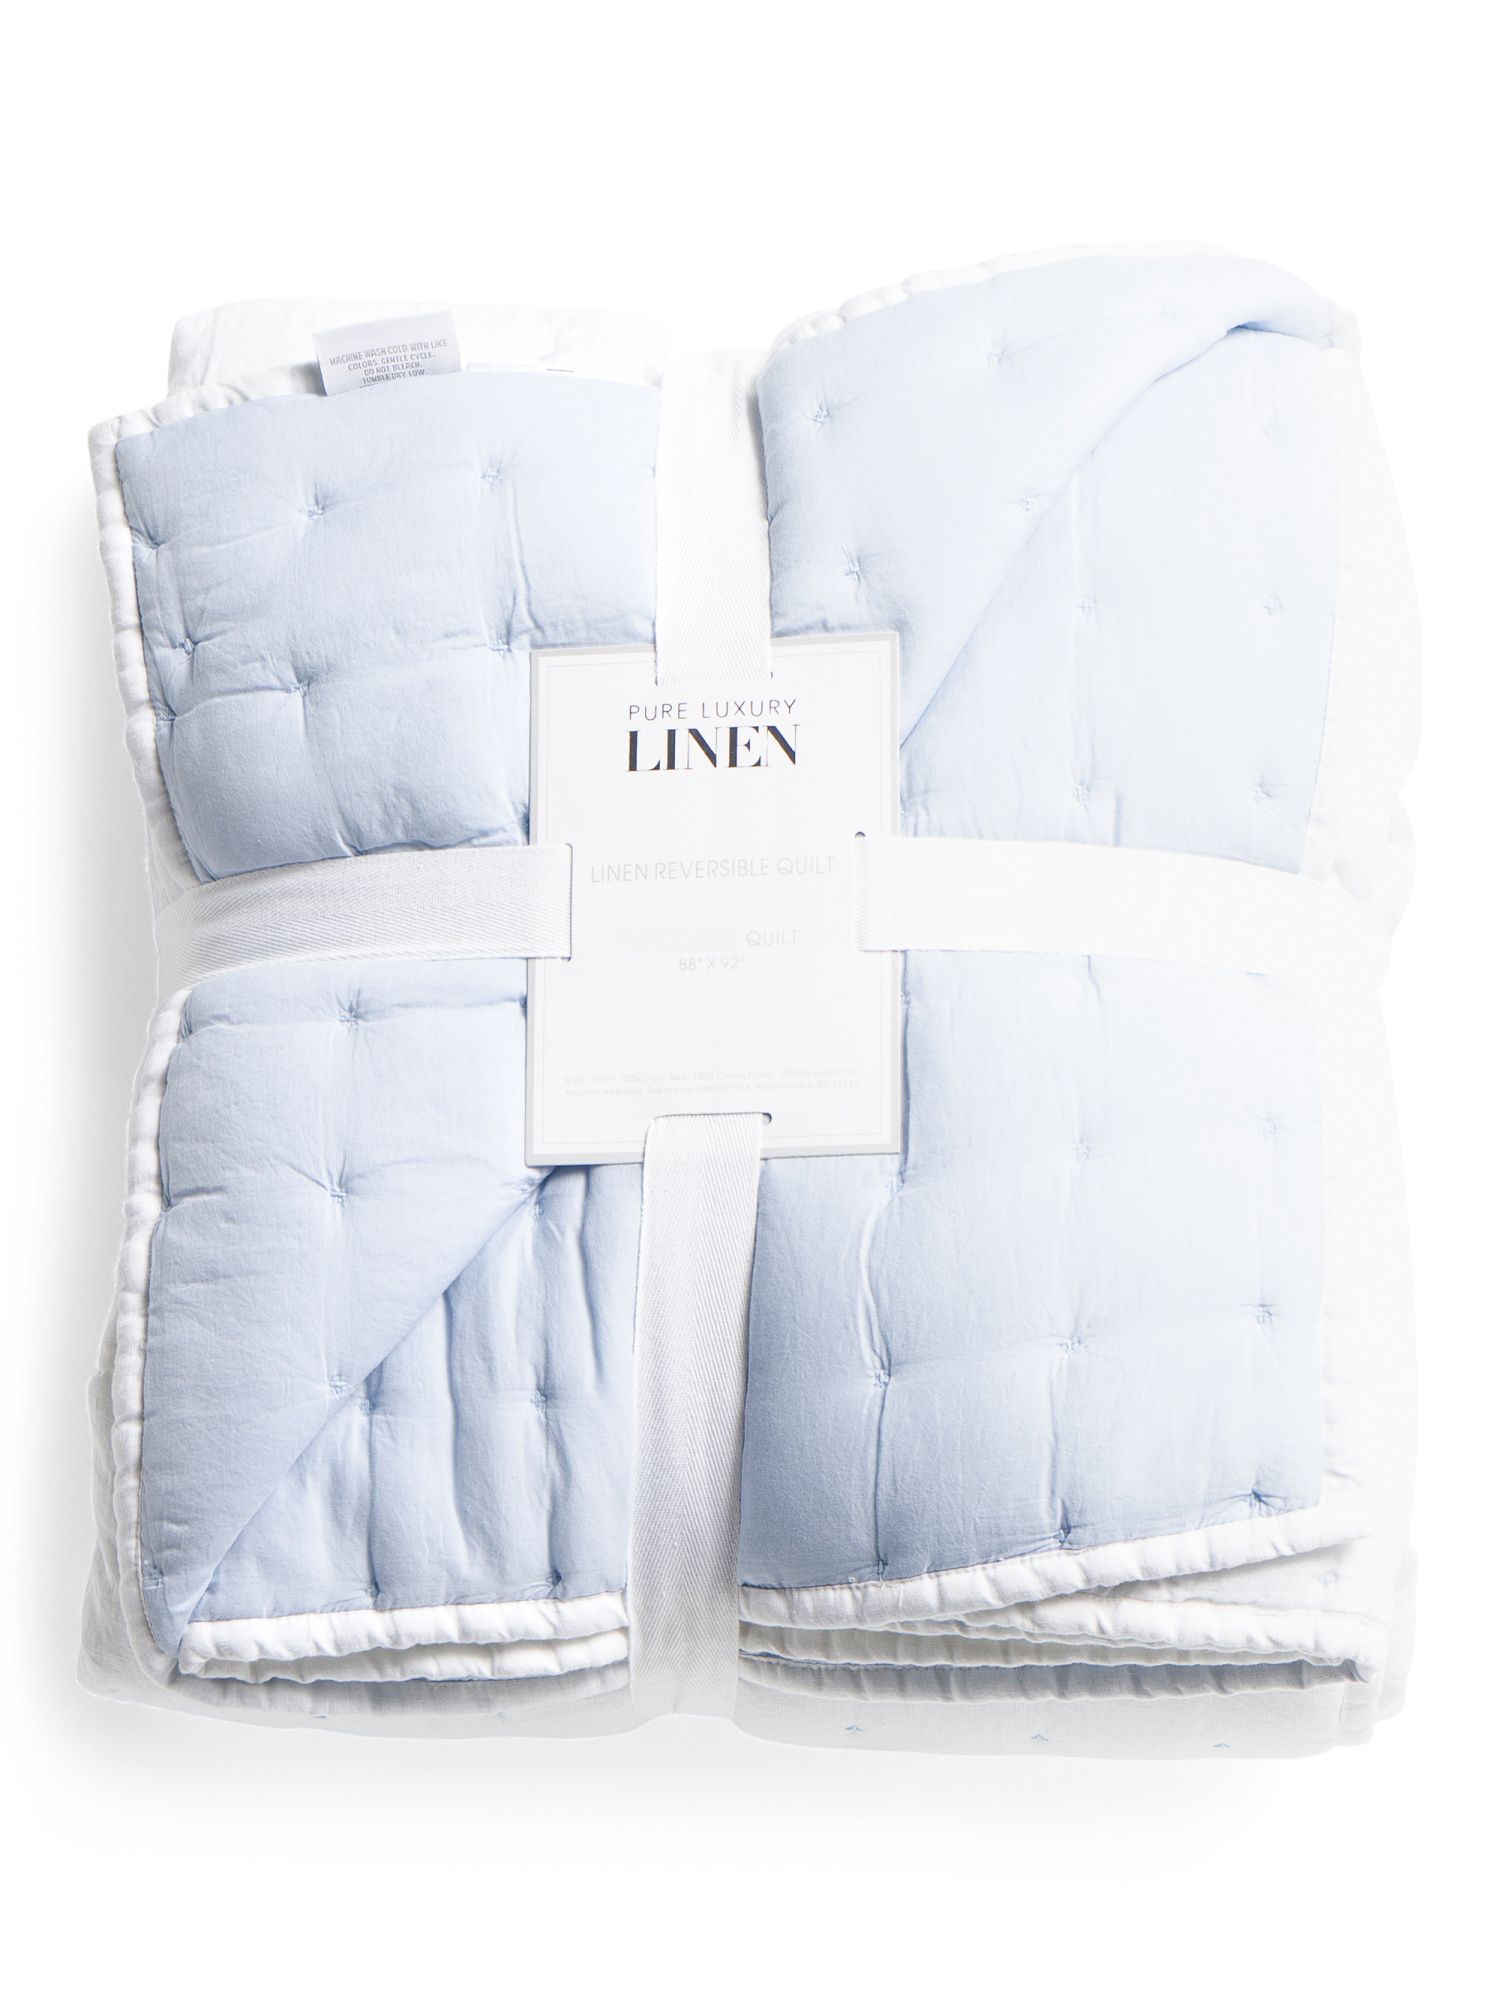 Made In India Linen Reversible Quilt With Cross Stitching | TJ Maxx